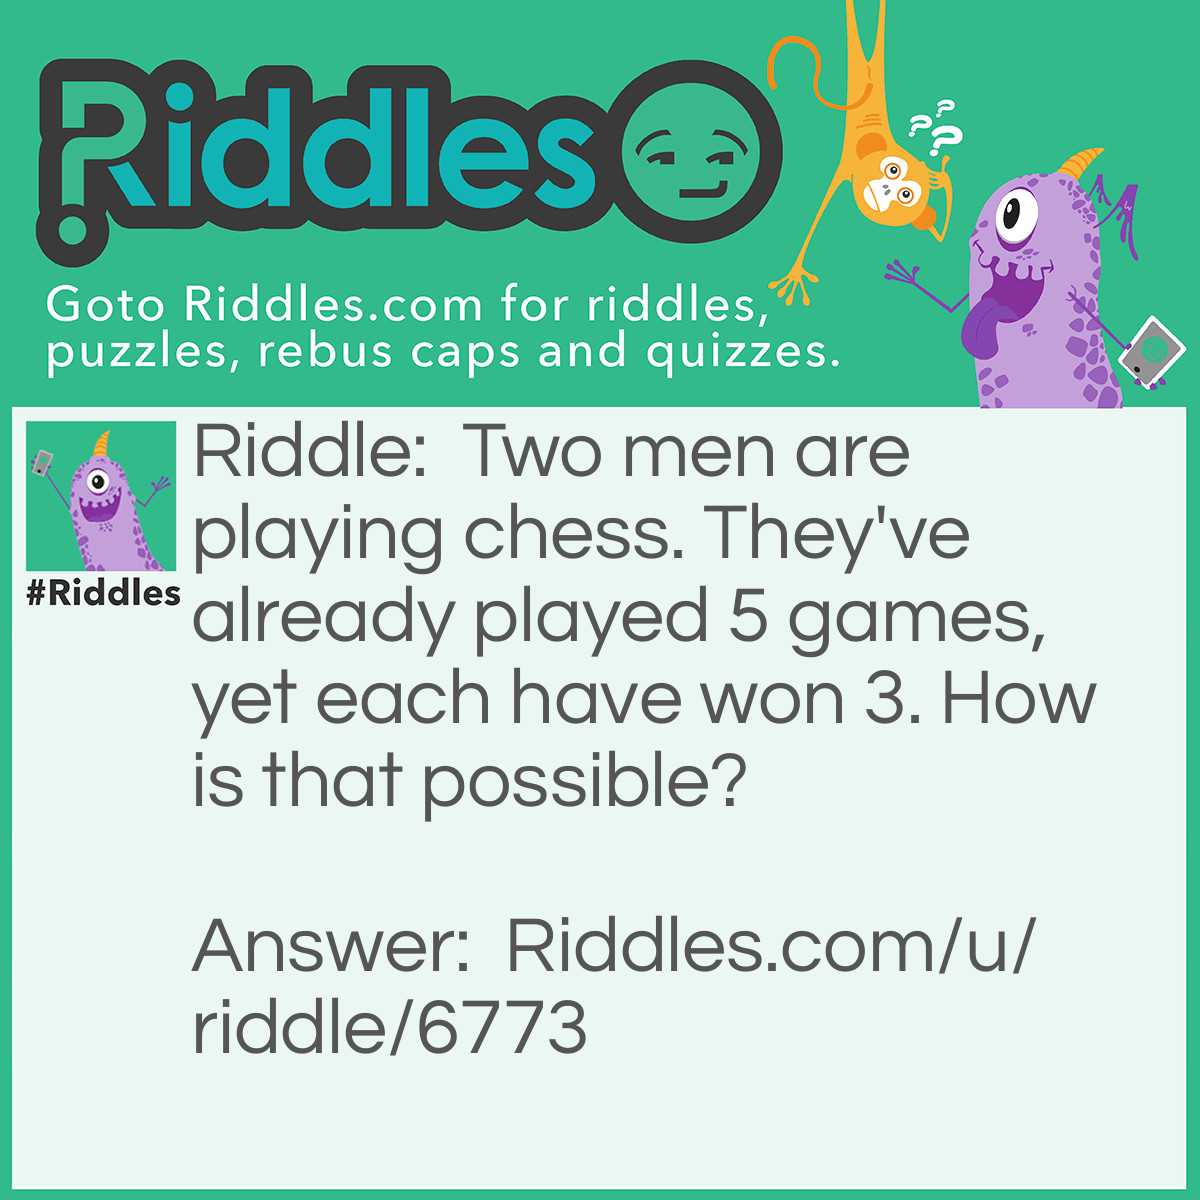 Riddle: Two men are playing chess. They've already played 5 games, yet each have won 3. How is that possible? Answer: They are not playing each other.